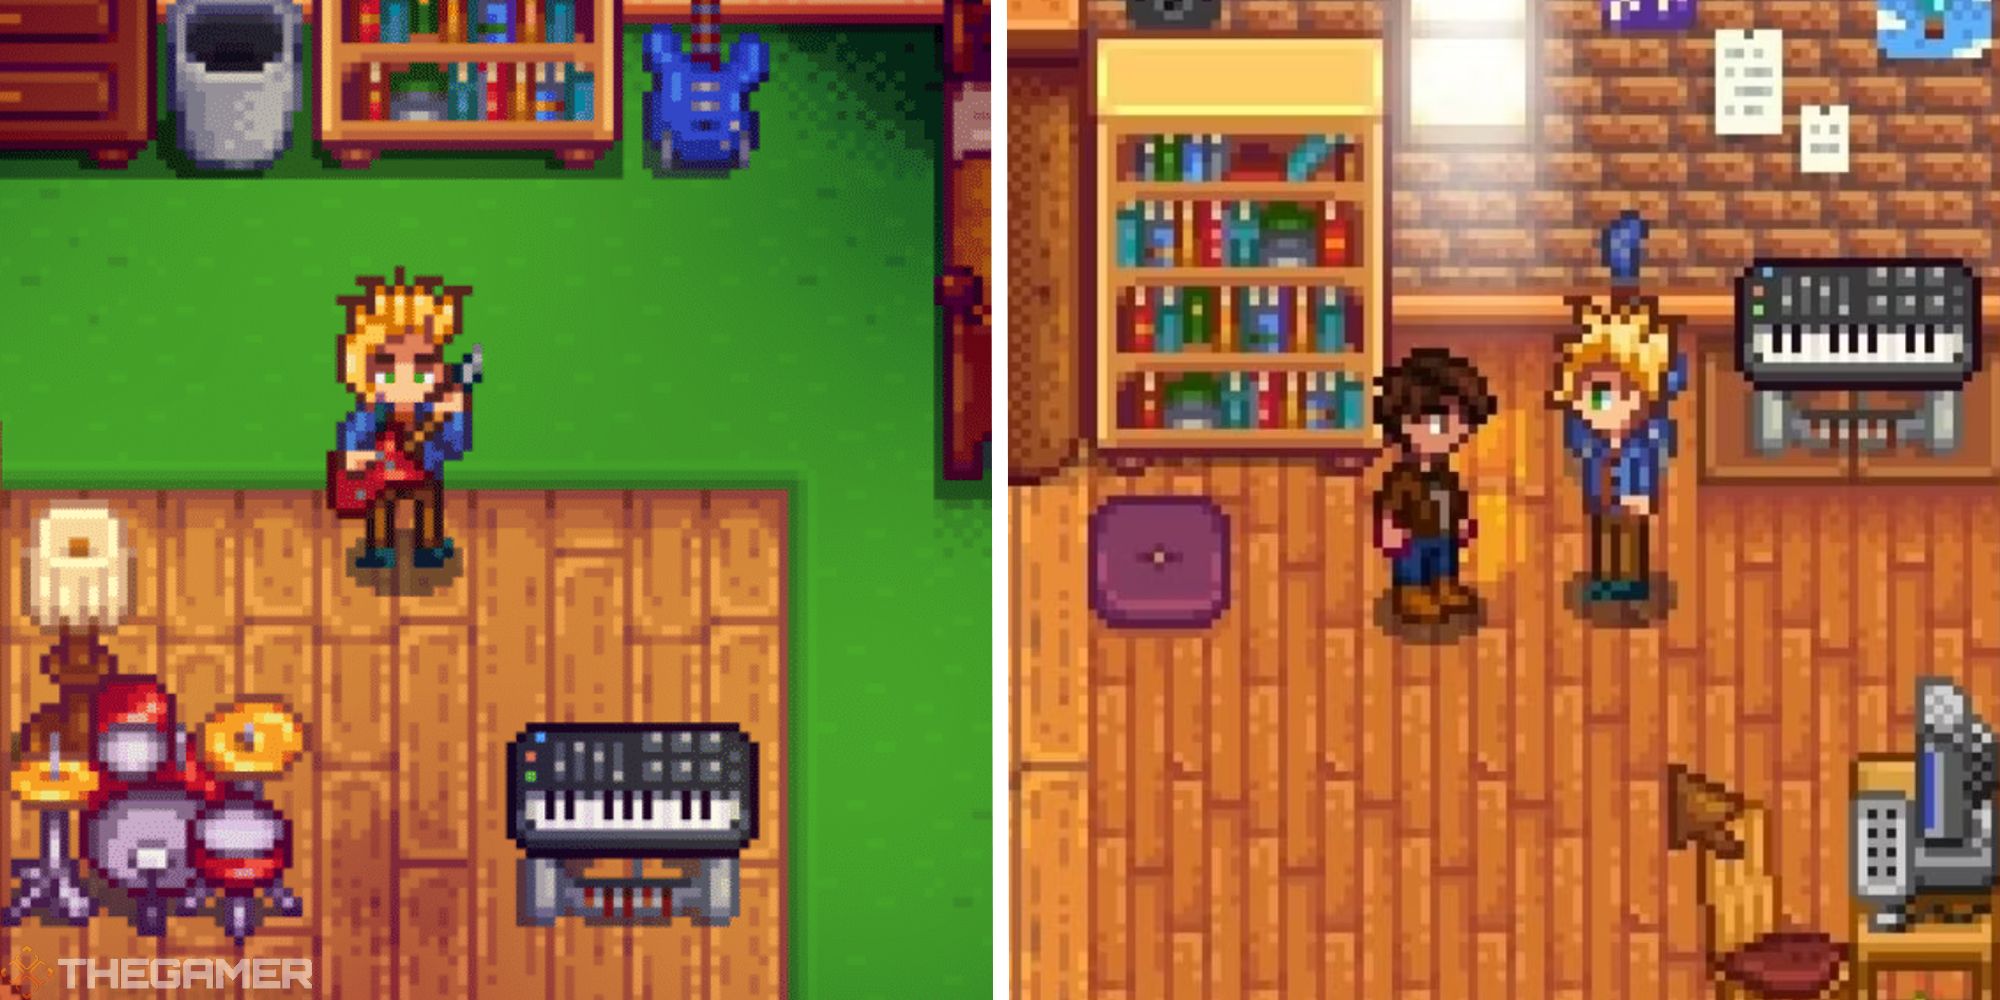 split image showing sam his room next to image of sam talking to player in farmhouse